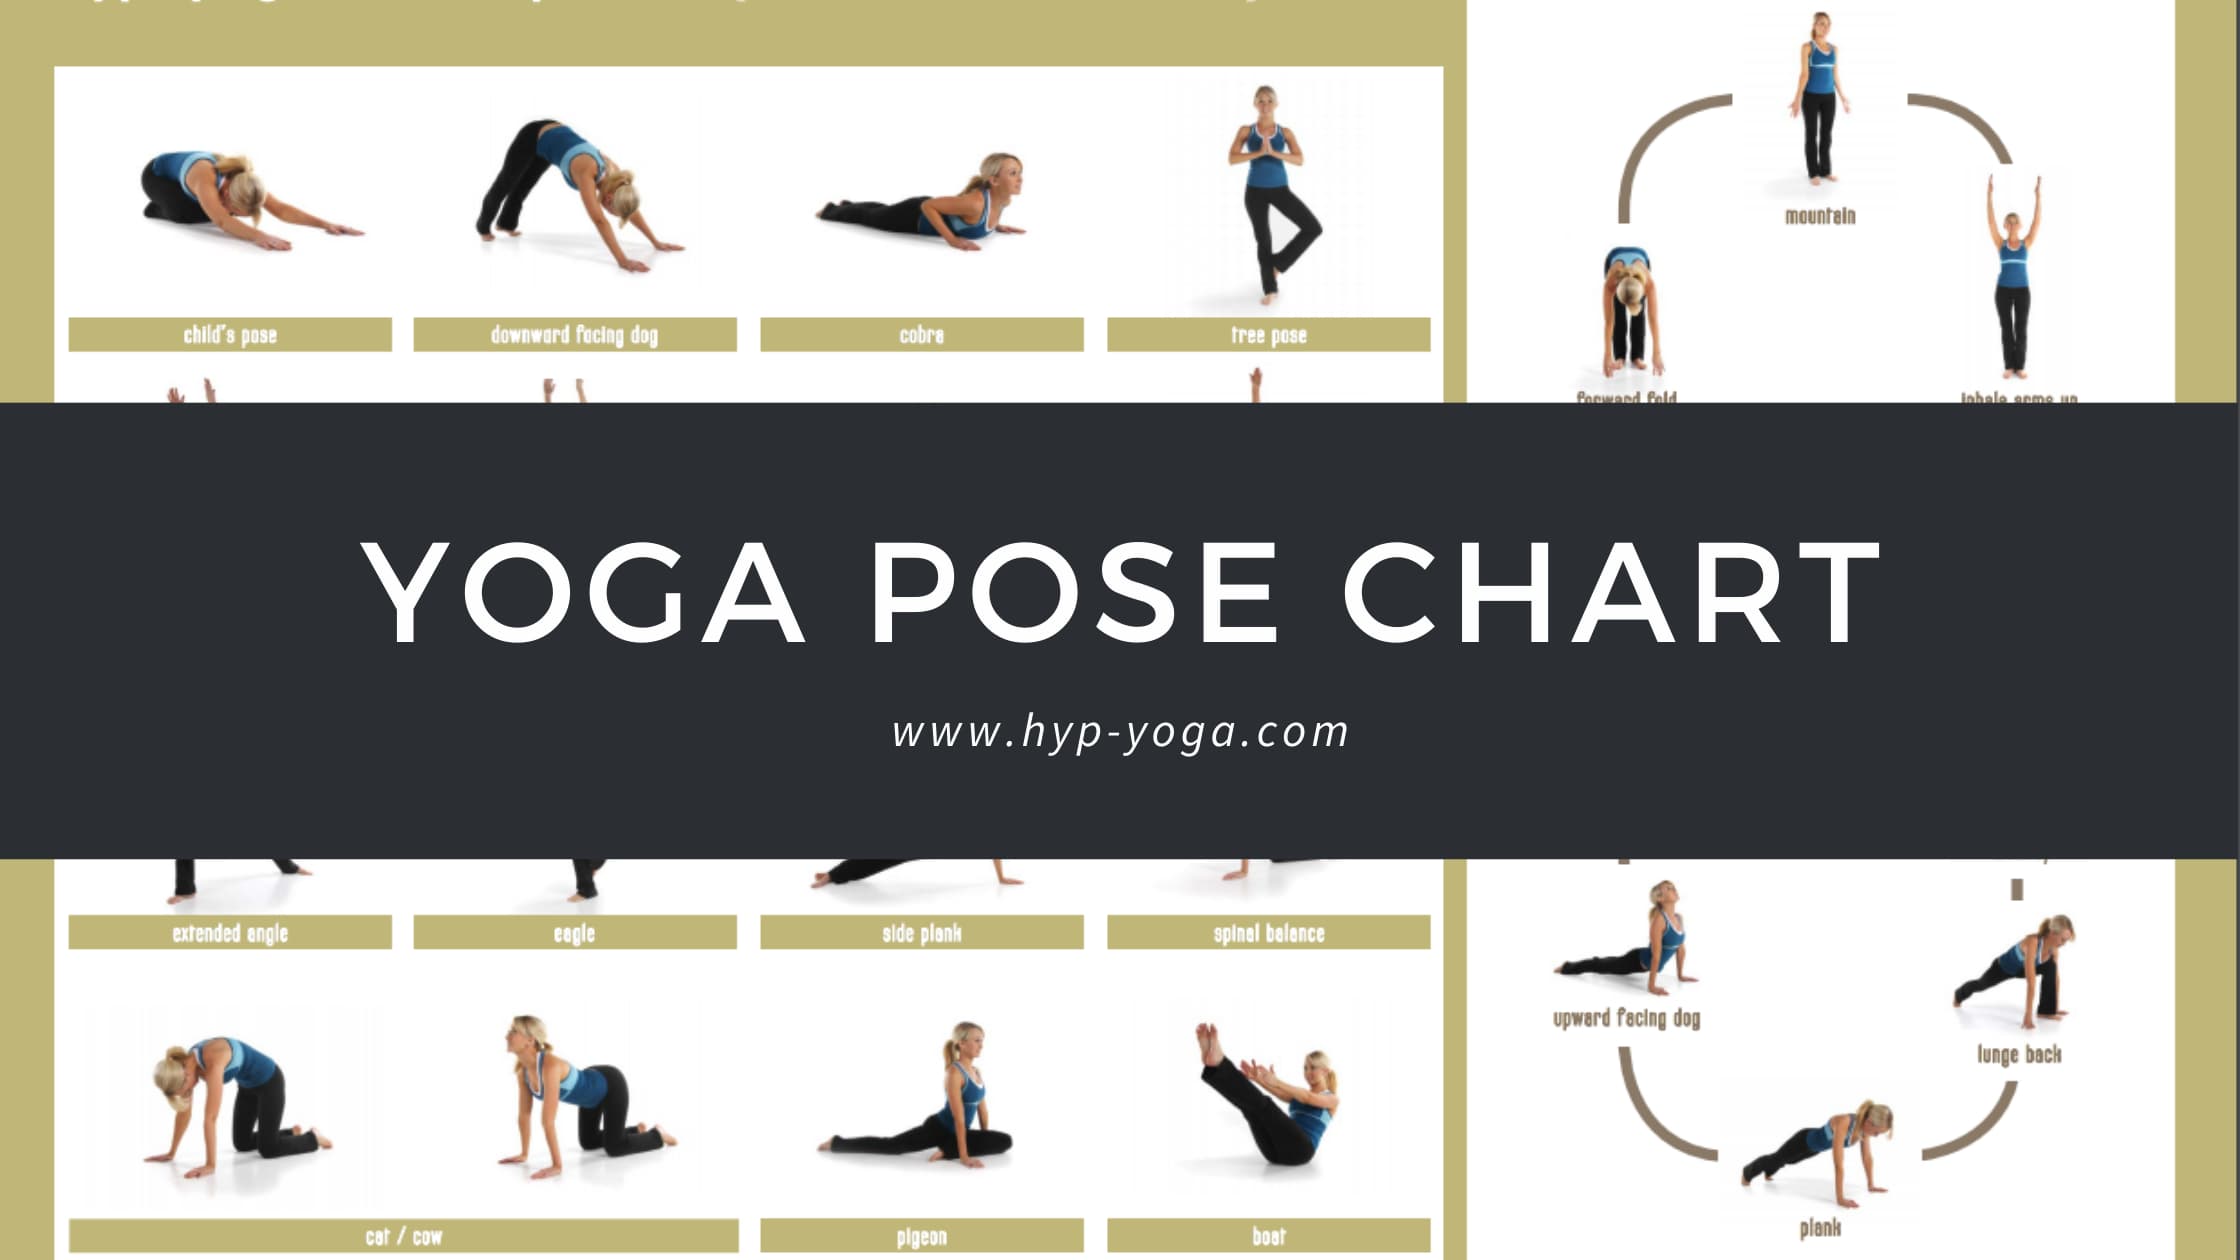 yoga pose chart with sun salutations from hyp-yoga.com